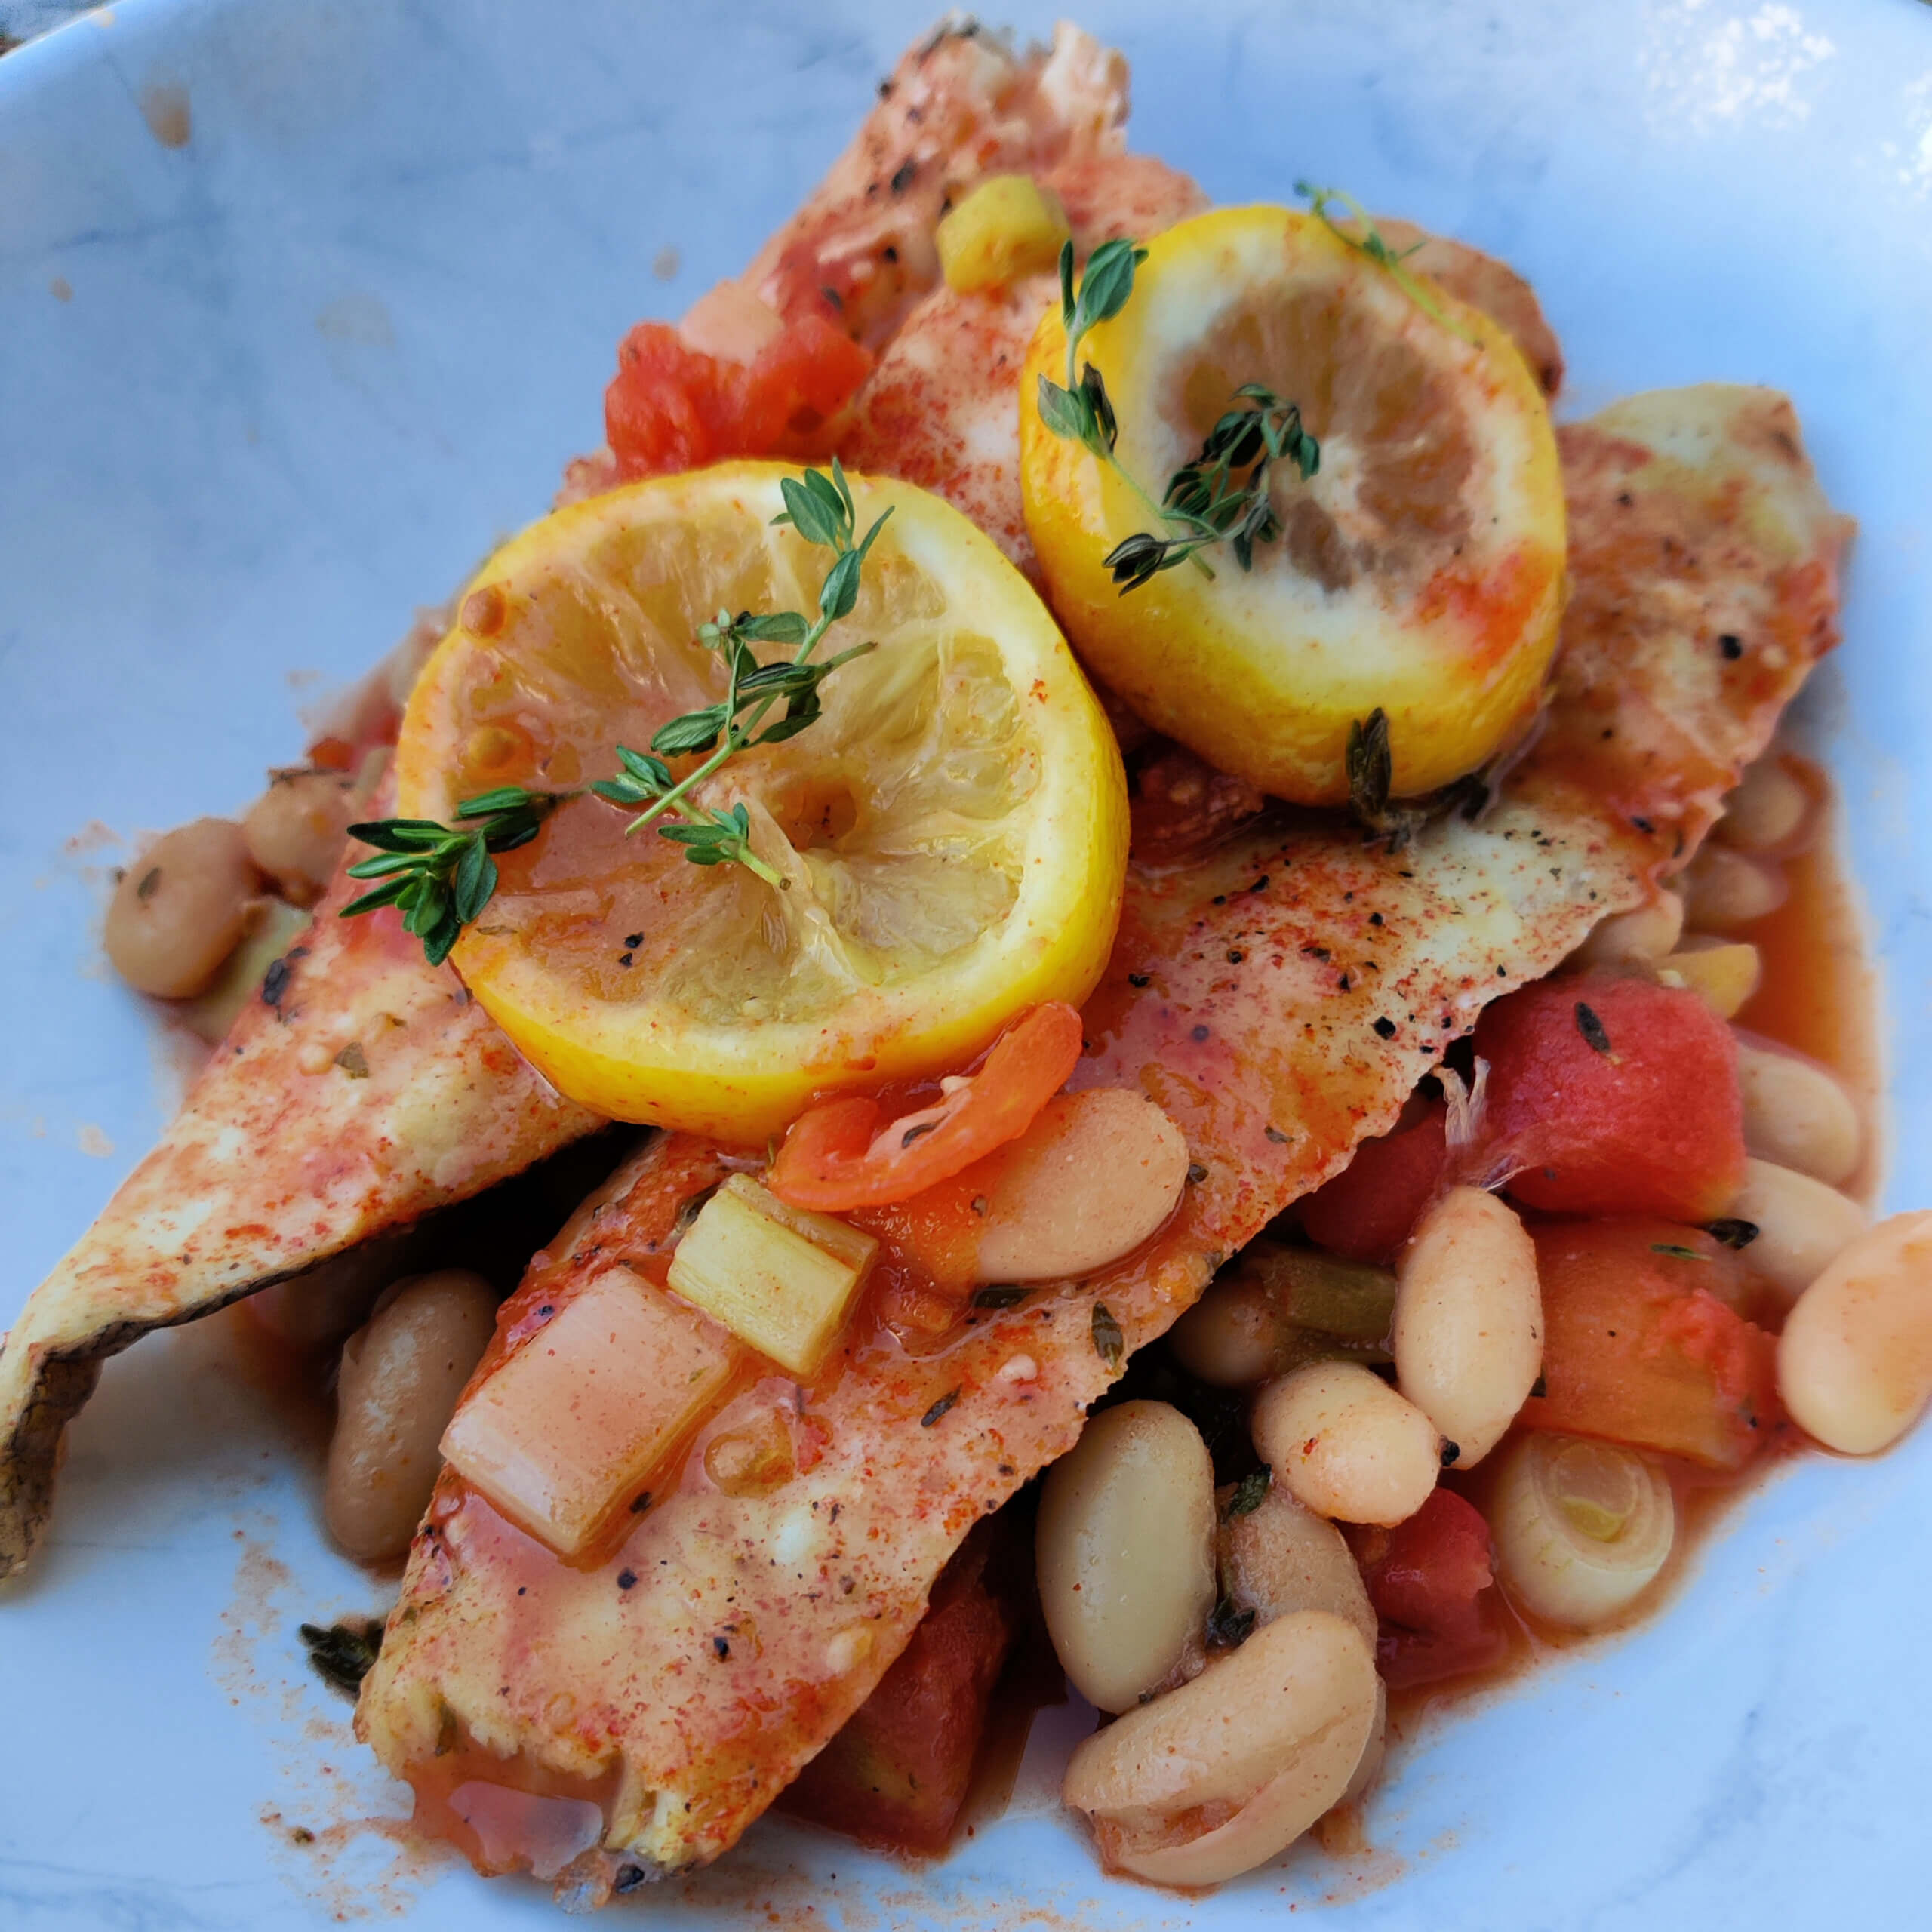 Portuguese style fish in a bowl